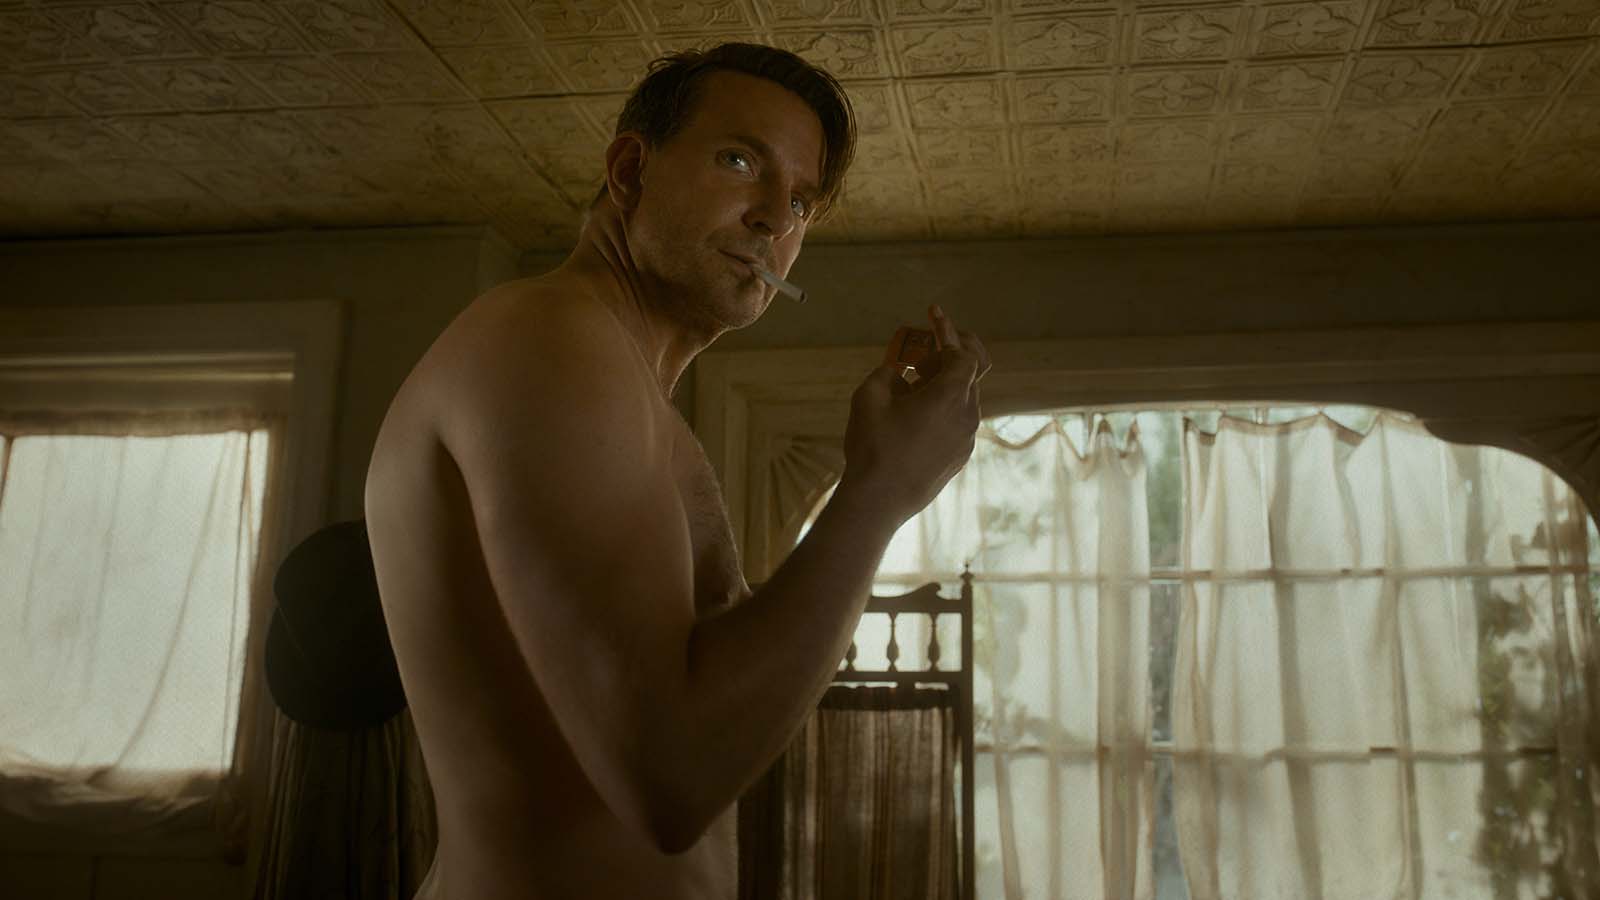 Stanton (Bradley Cooper) learned to box for noir thriller, Nightmare Alley. Image © Searchlight Pictures